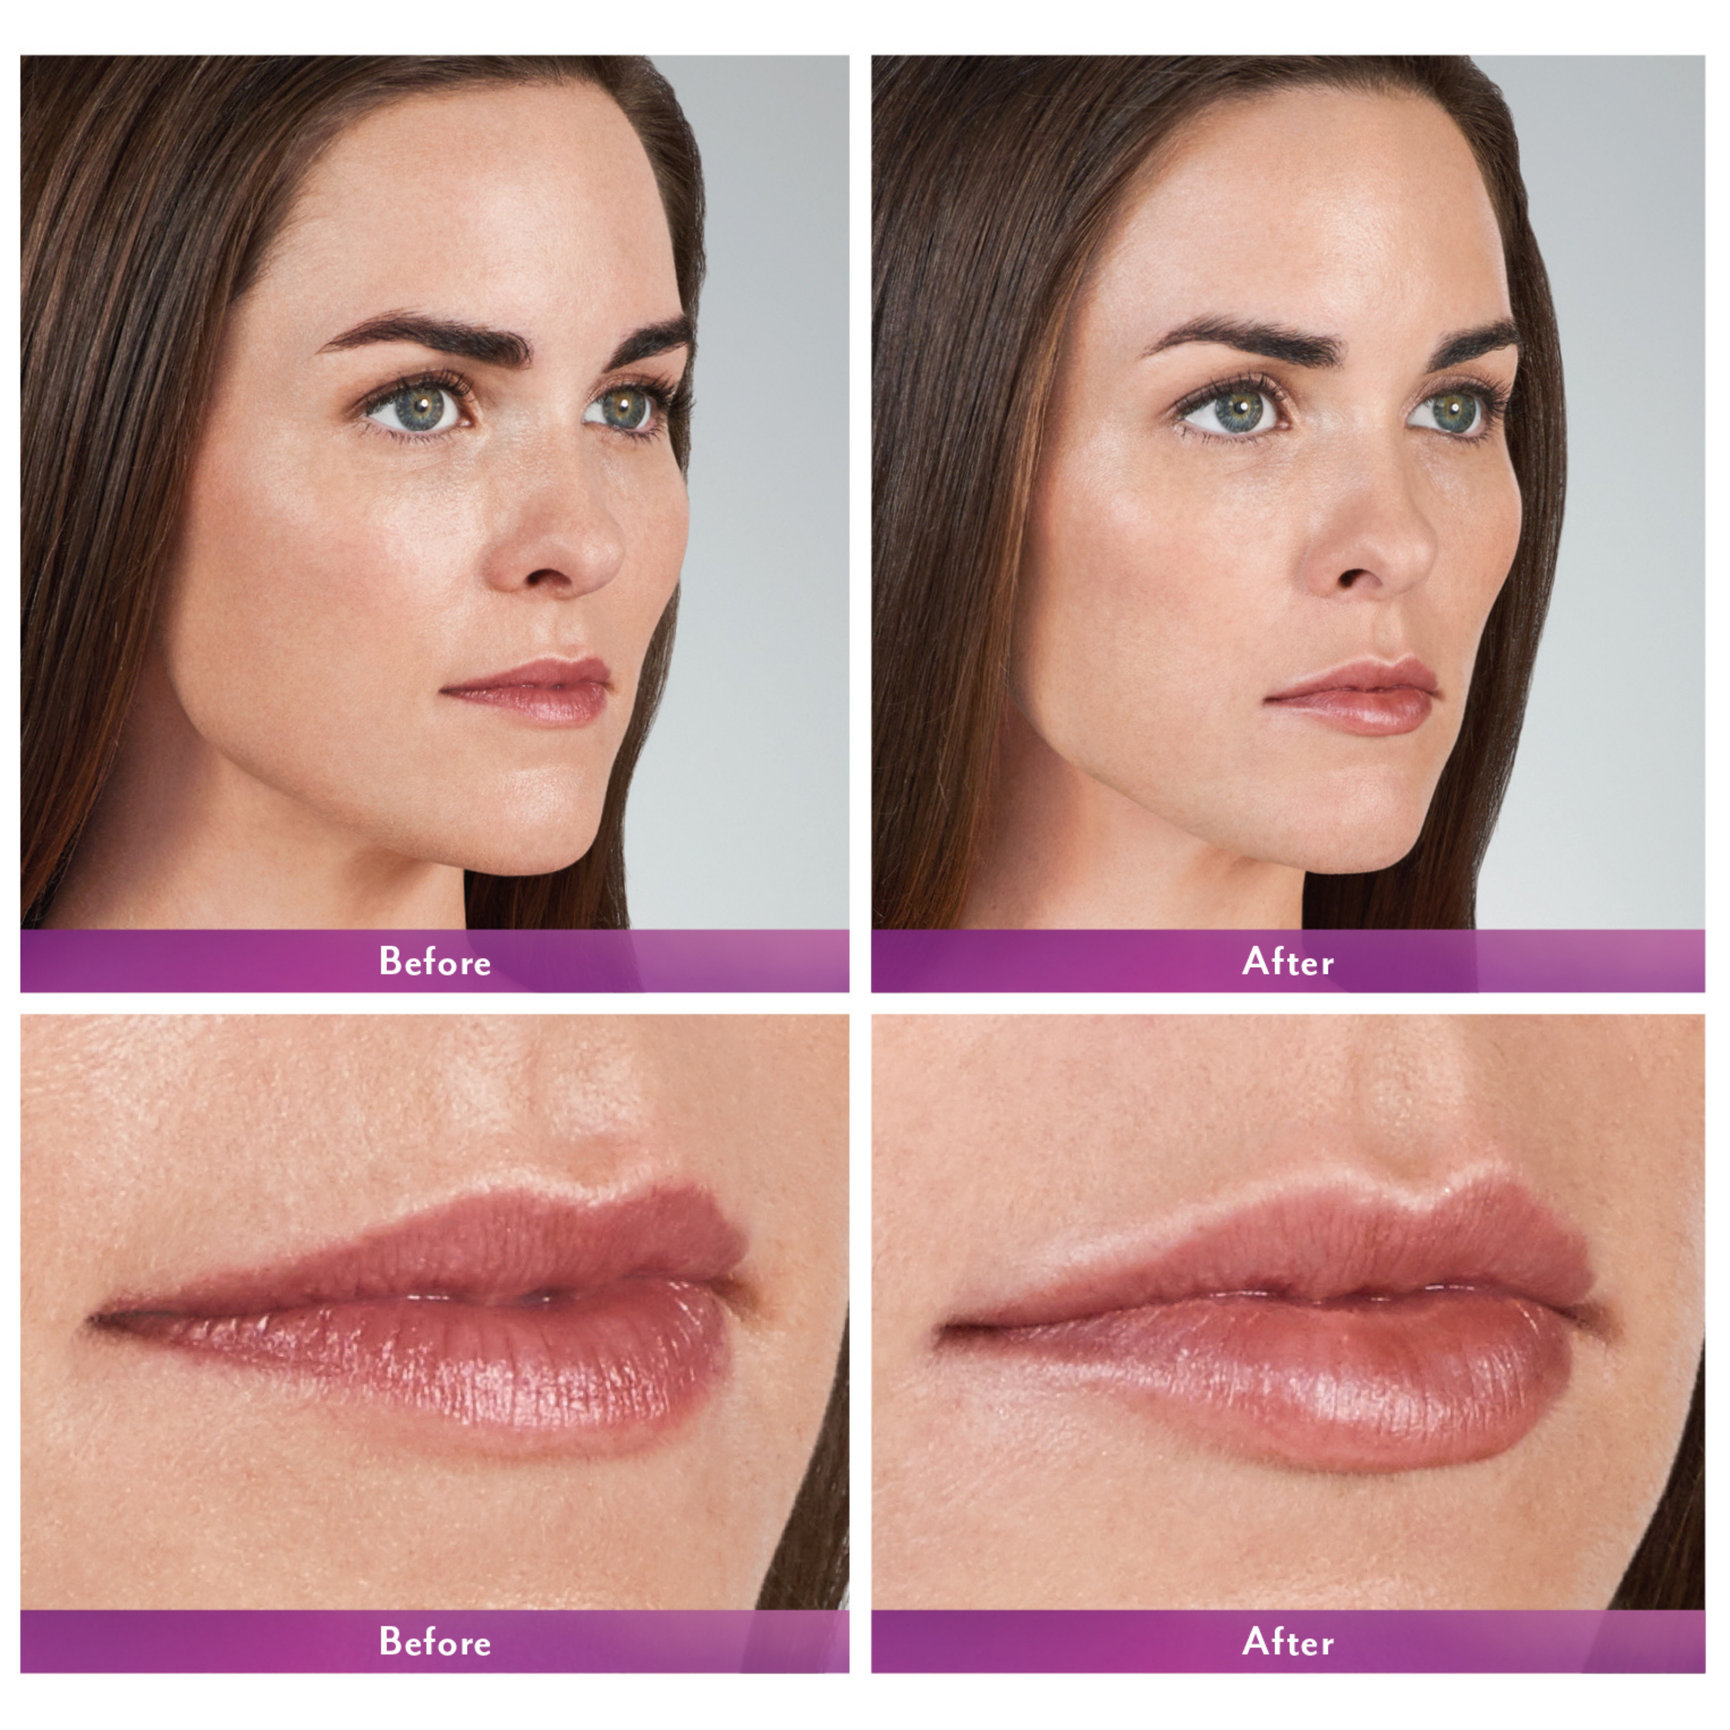 Lip Filler Before and After Feel Ideal 360 Med Spa Southlake, TX